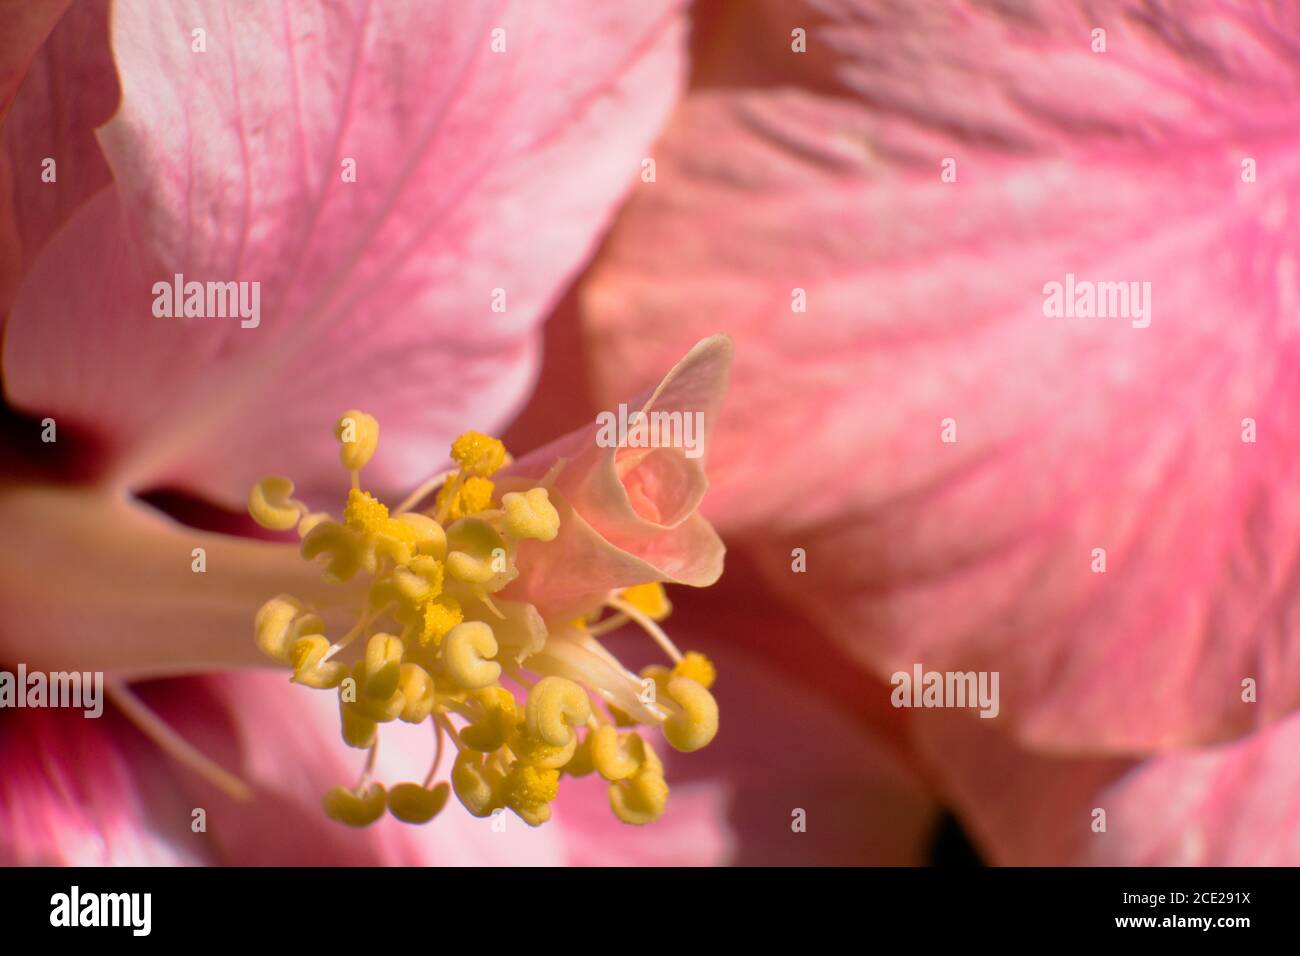 Close-up of the pistil of a pink Hibiscus flower lit by the sunlight Stock Photo